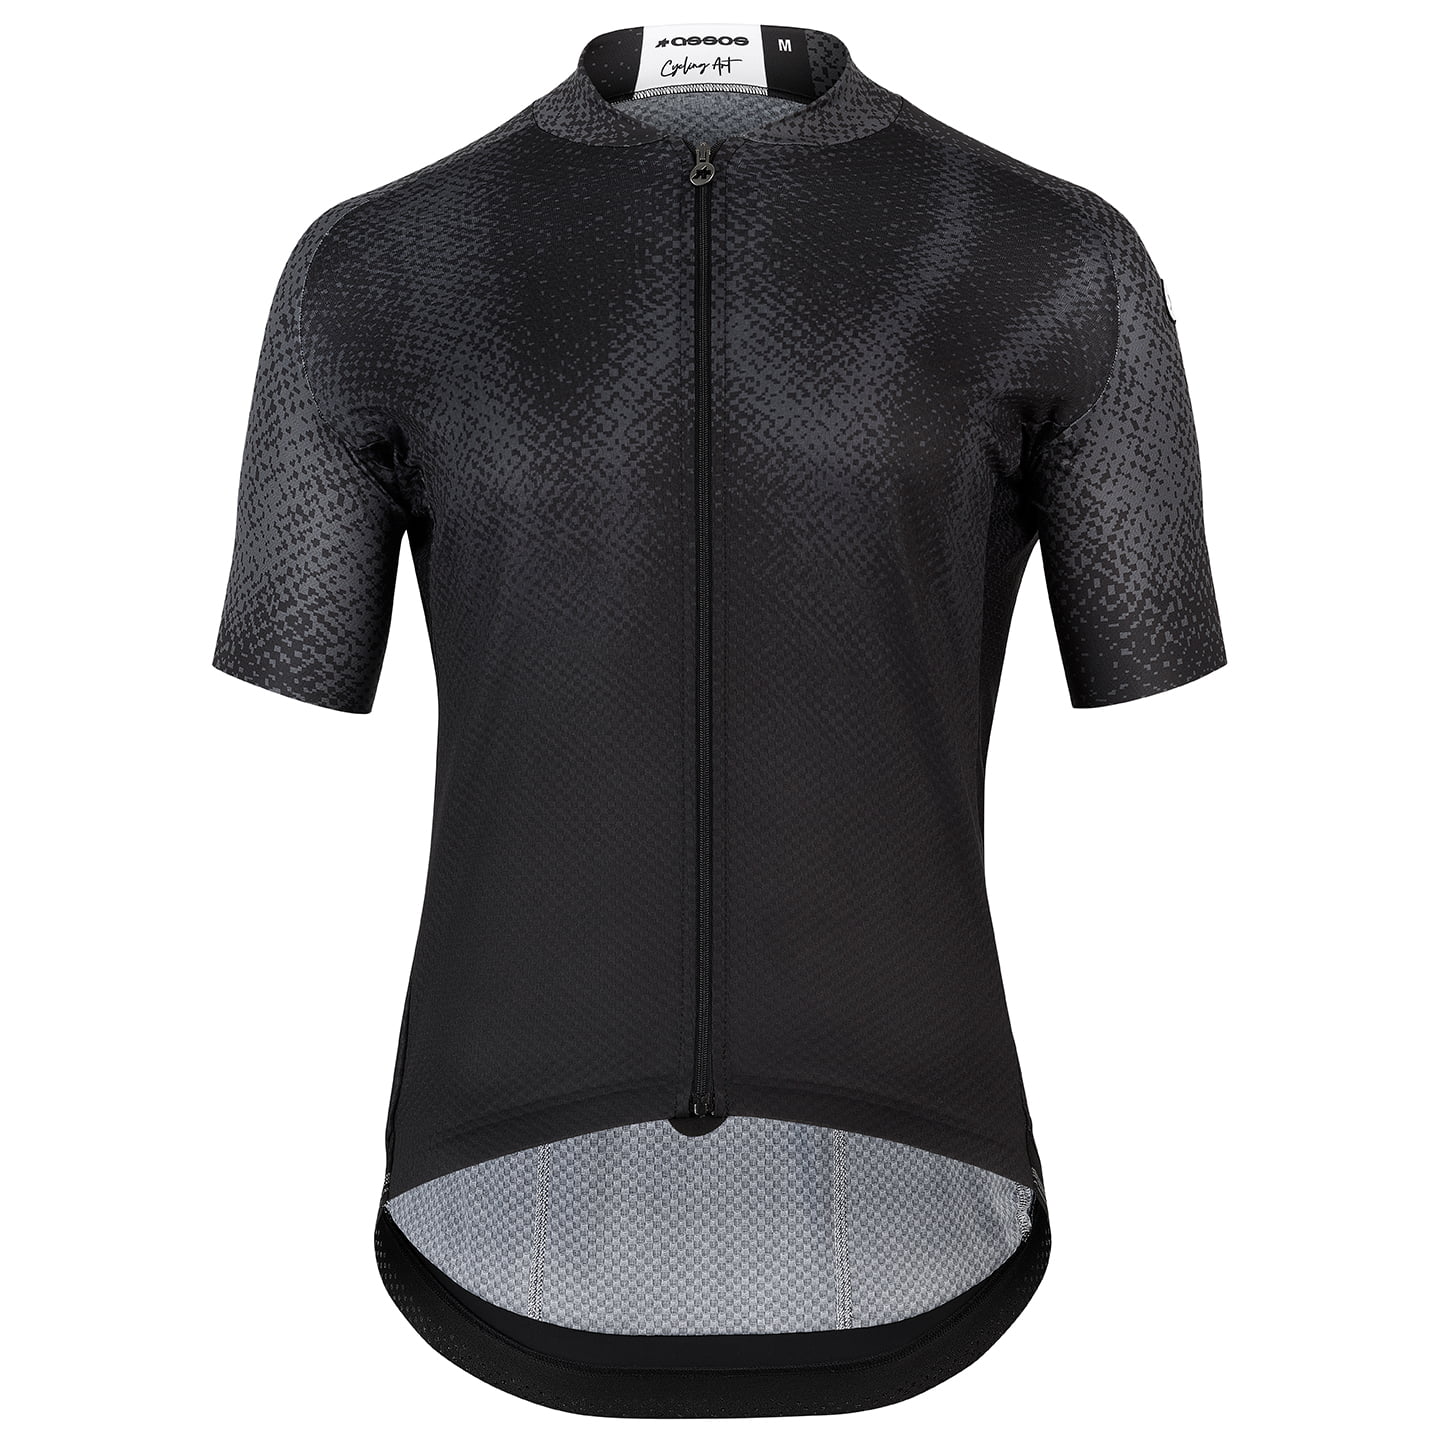 ASSOS Mille GT C2 EVO Heat Map Short Sleeve Jersey Short Sleeve Jersey, for men, size S, Cycling jersey, Cycling clothing